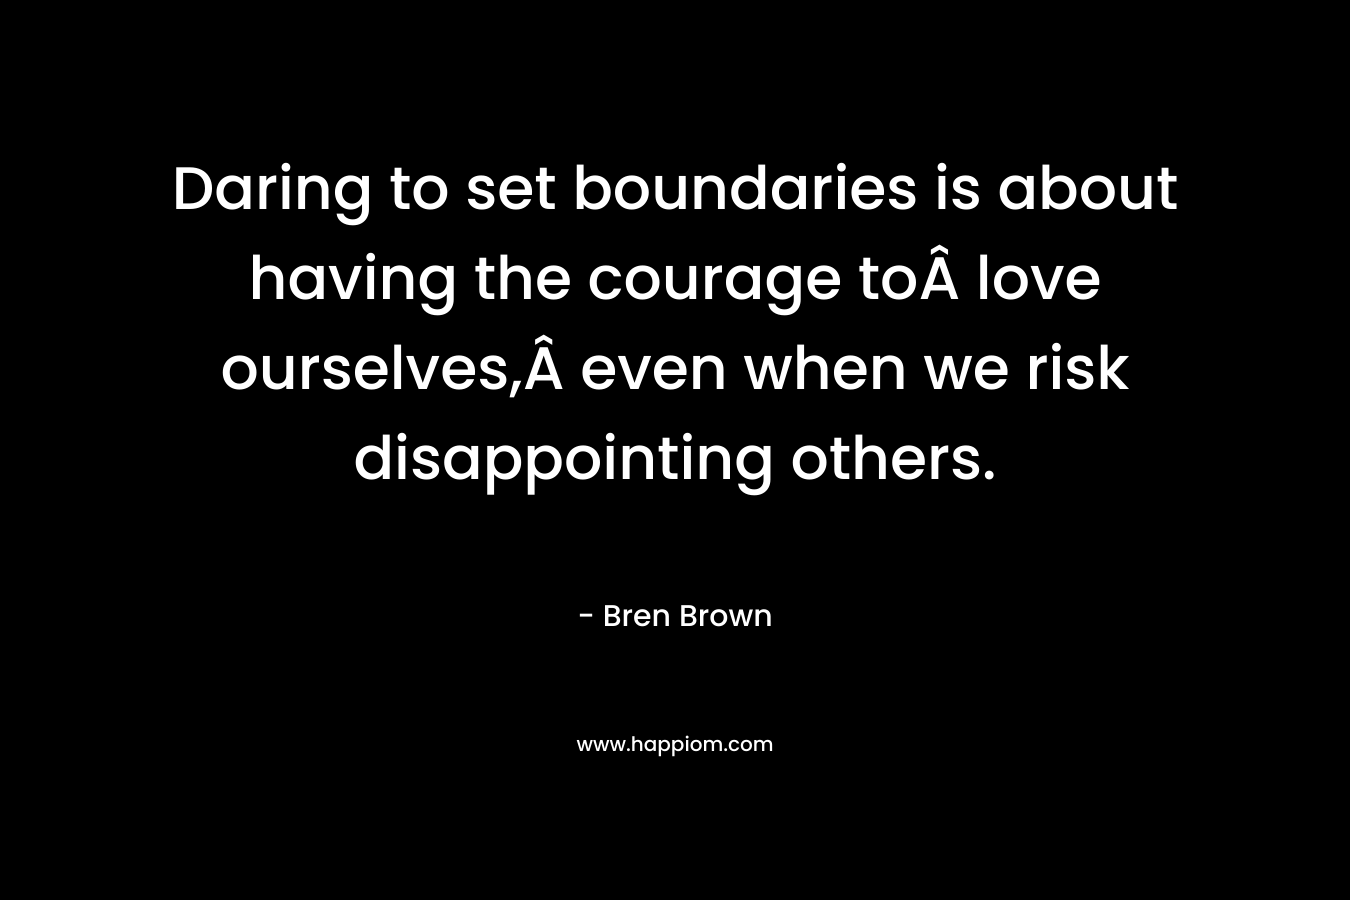 Daring to set boundaries is about having the courage toÂ love ourselves,Â even when we risk disappointing others.